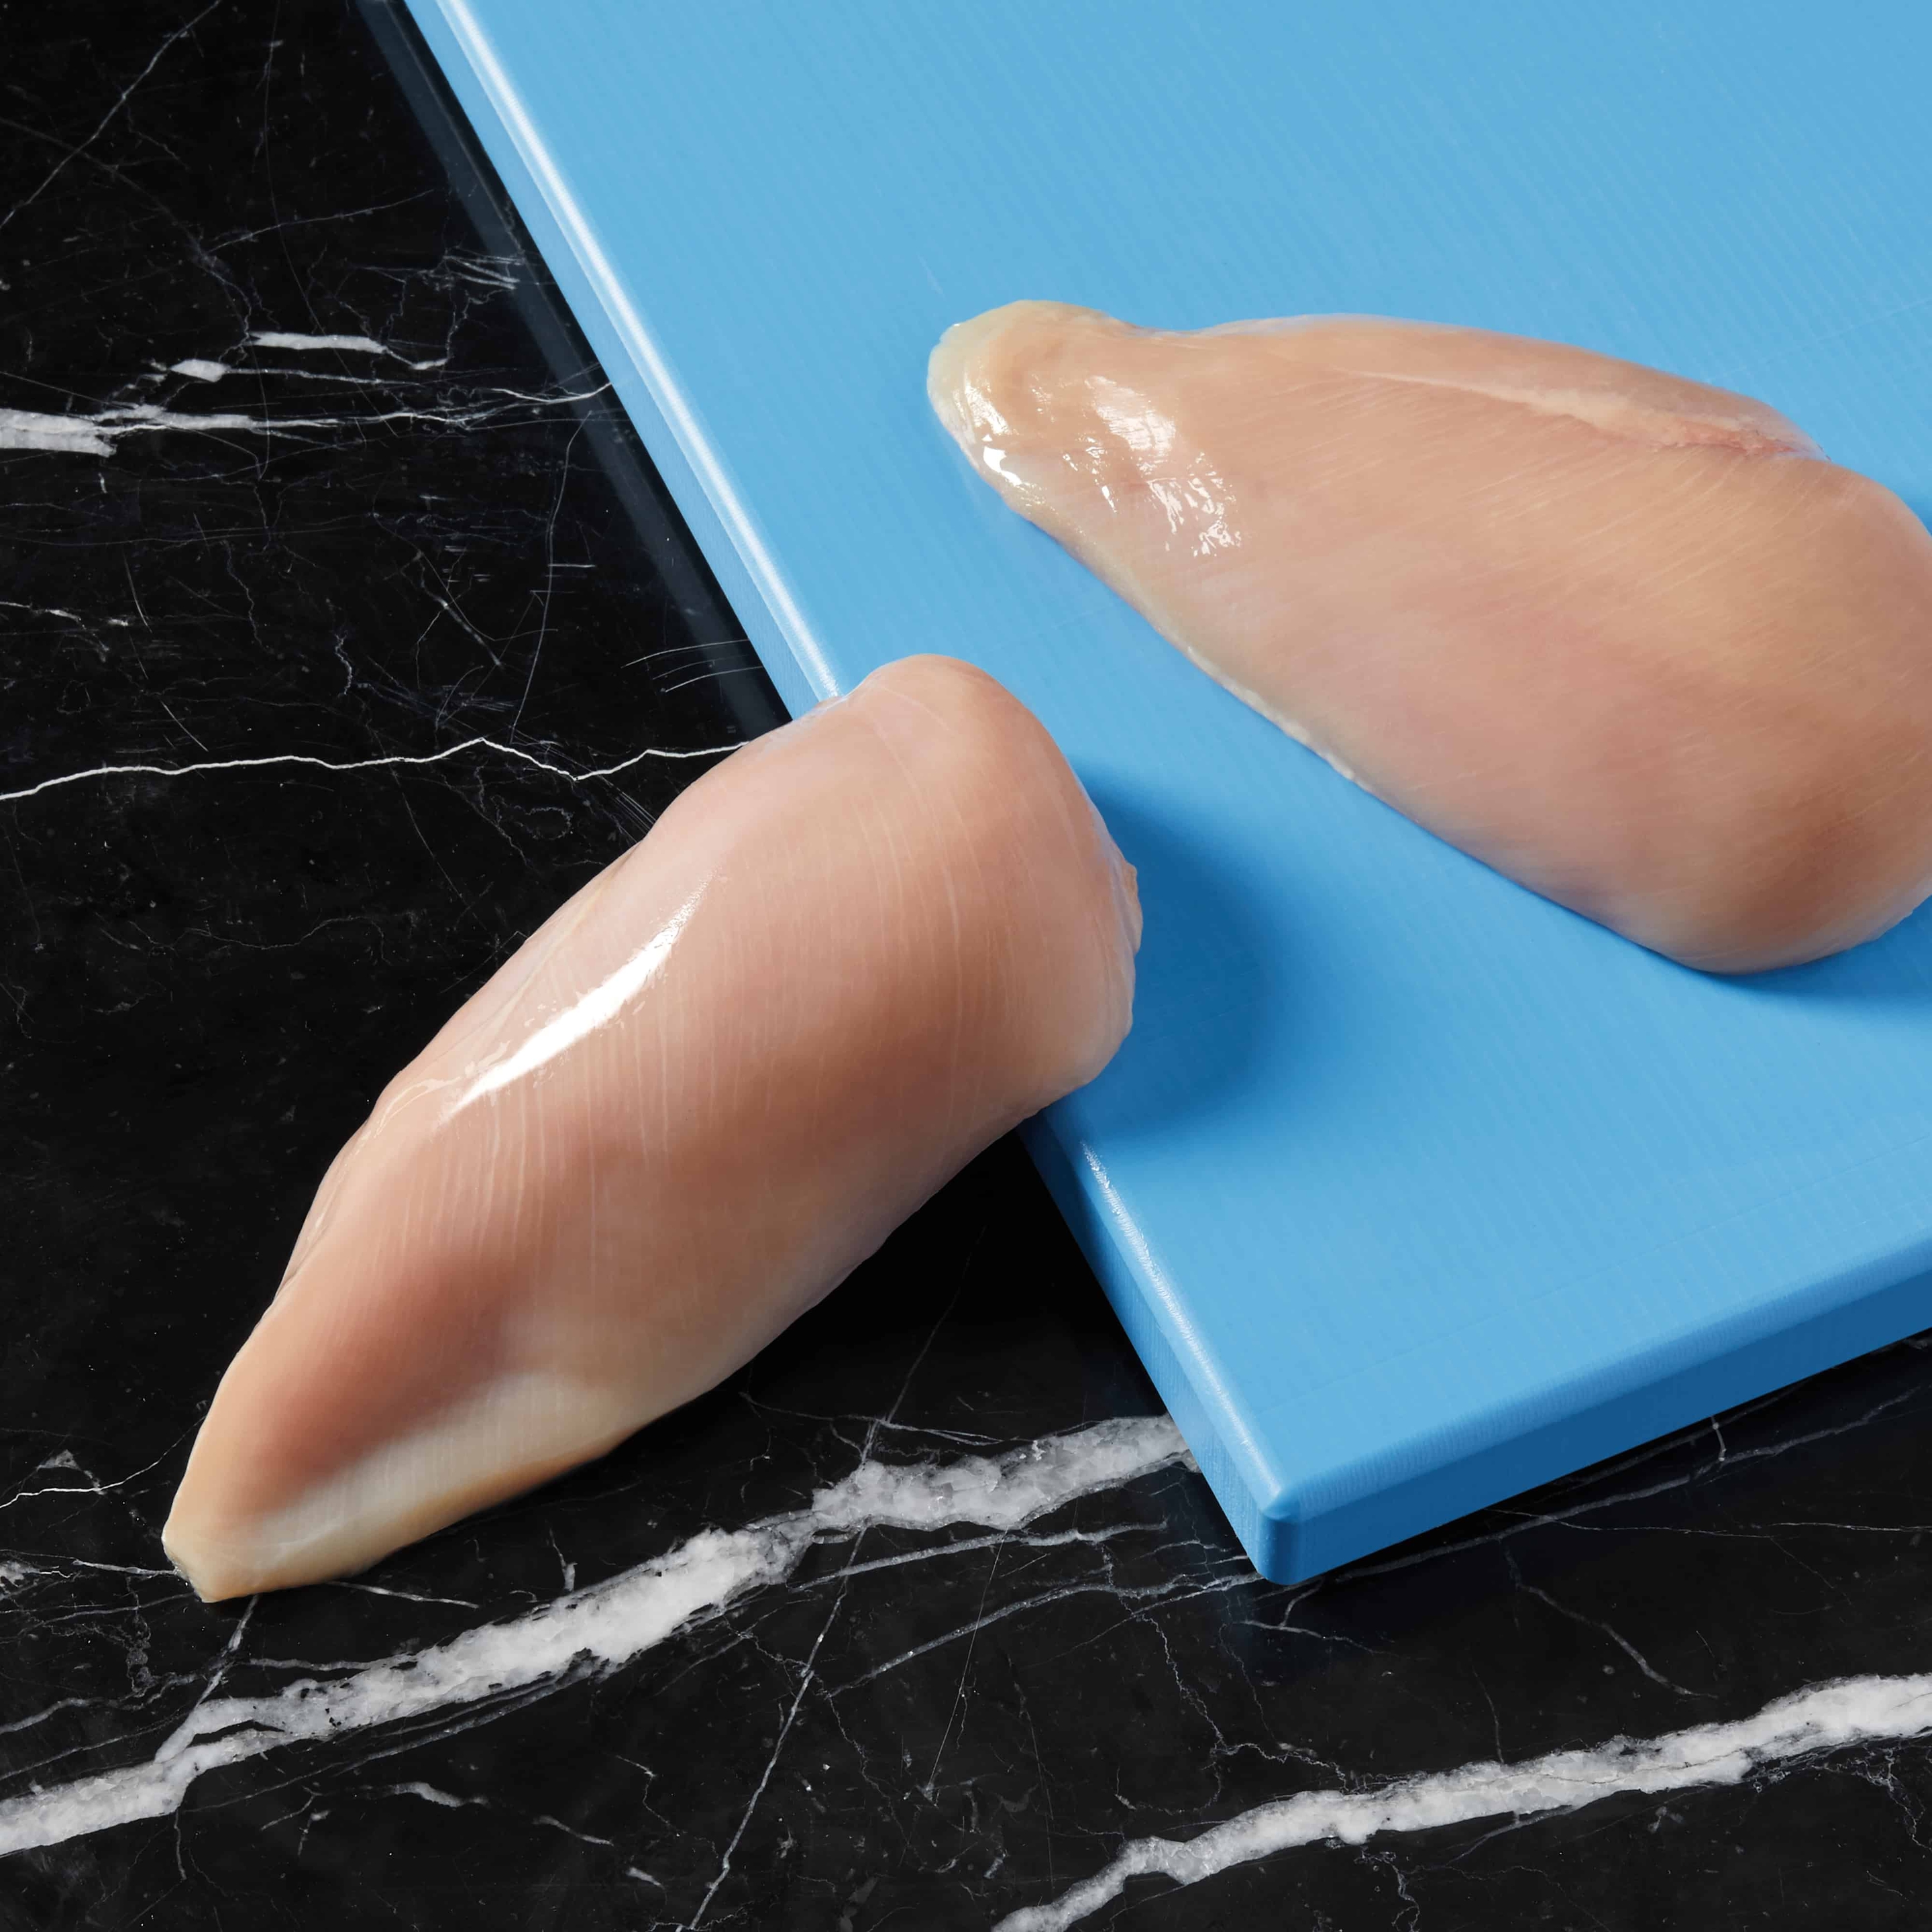 Two raw chicken breasts